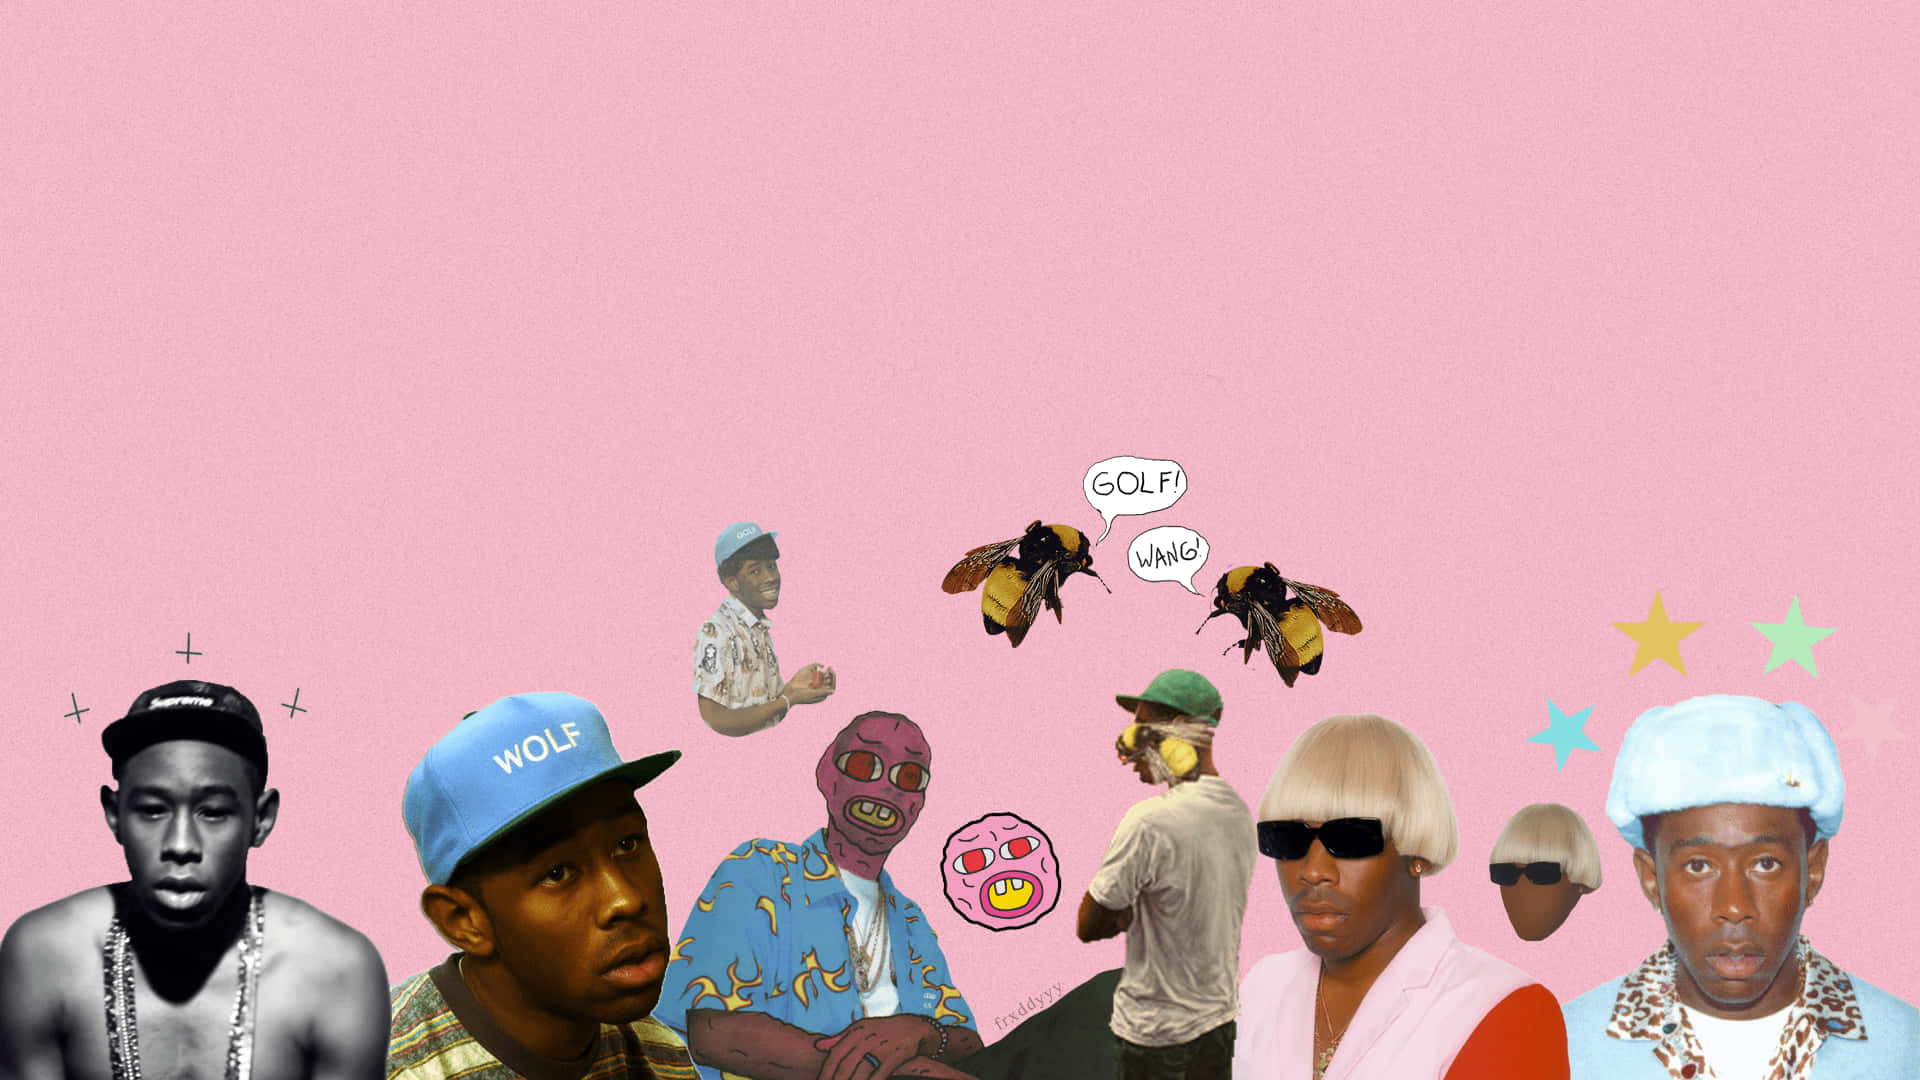 outlynings Flower Boy by Tyler The Creator x Juice WRLD from 2 years  ago Extended as a Desktop Wallpaper 4K  rwallpaperengine